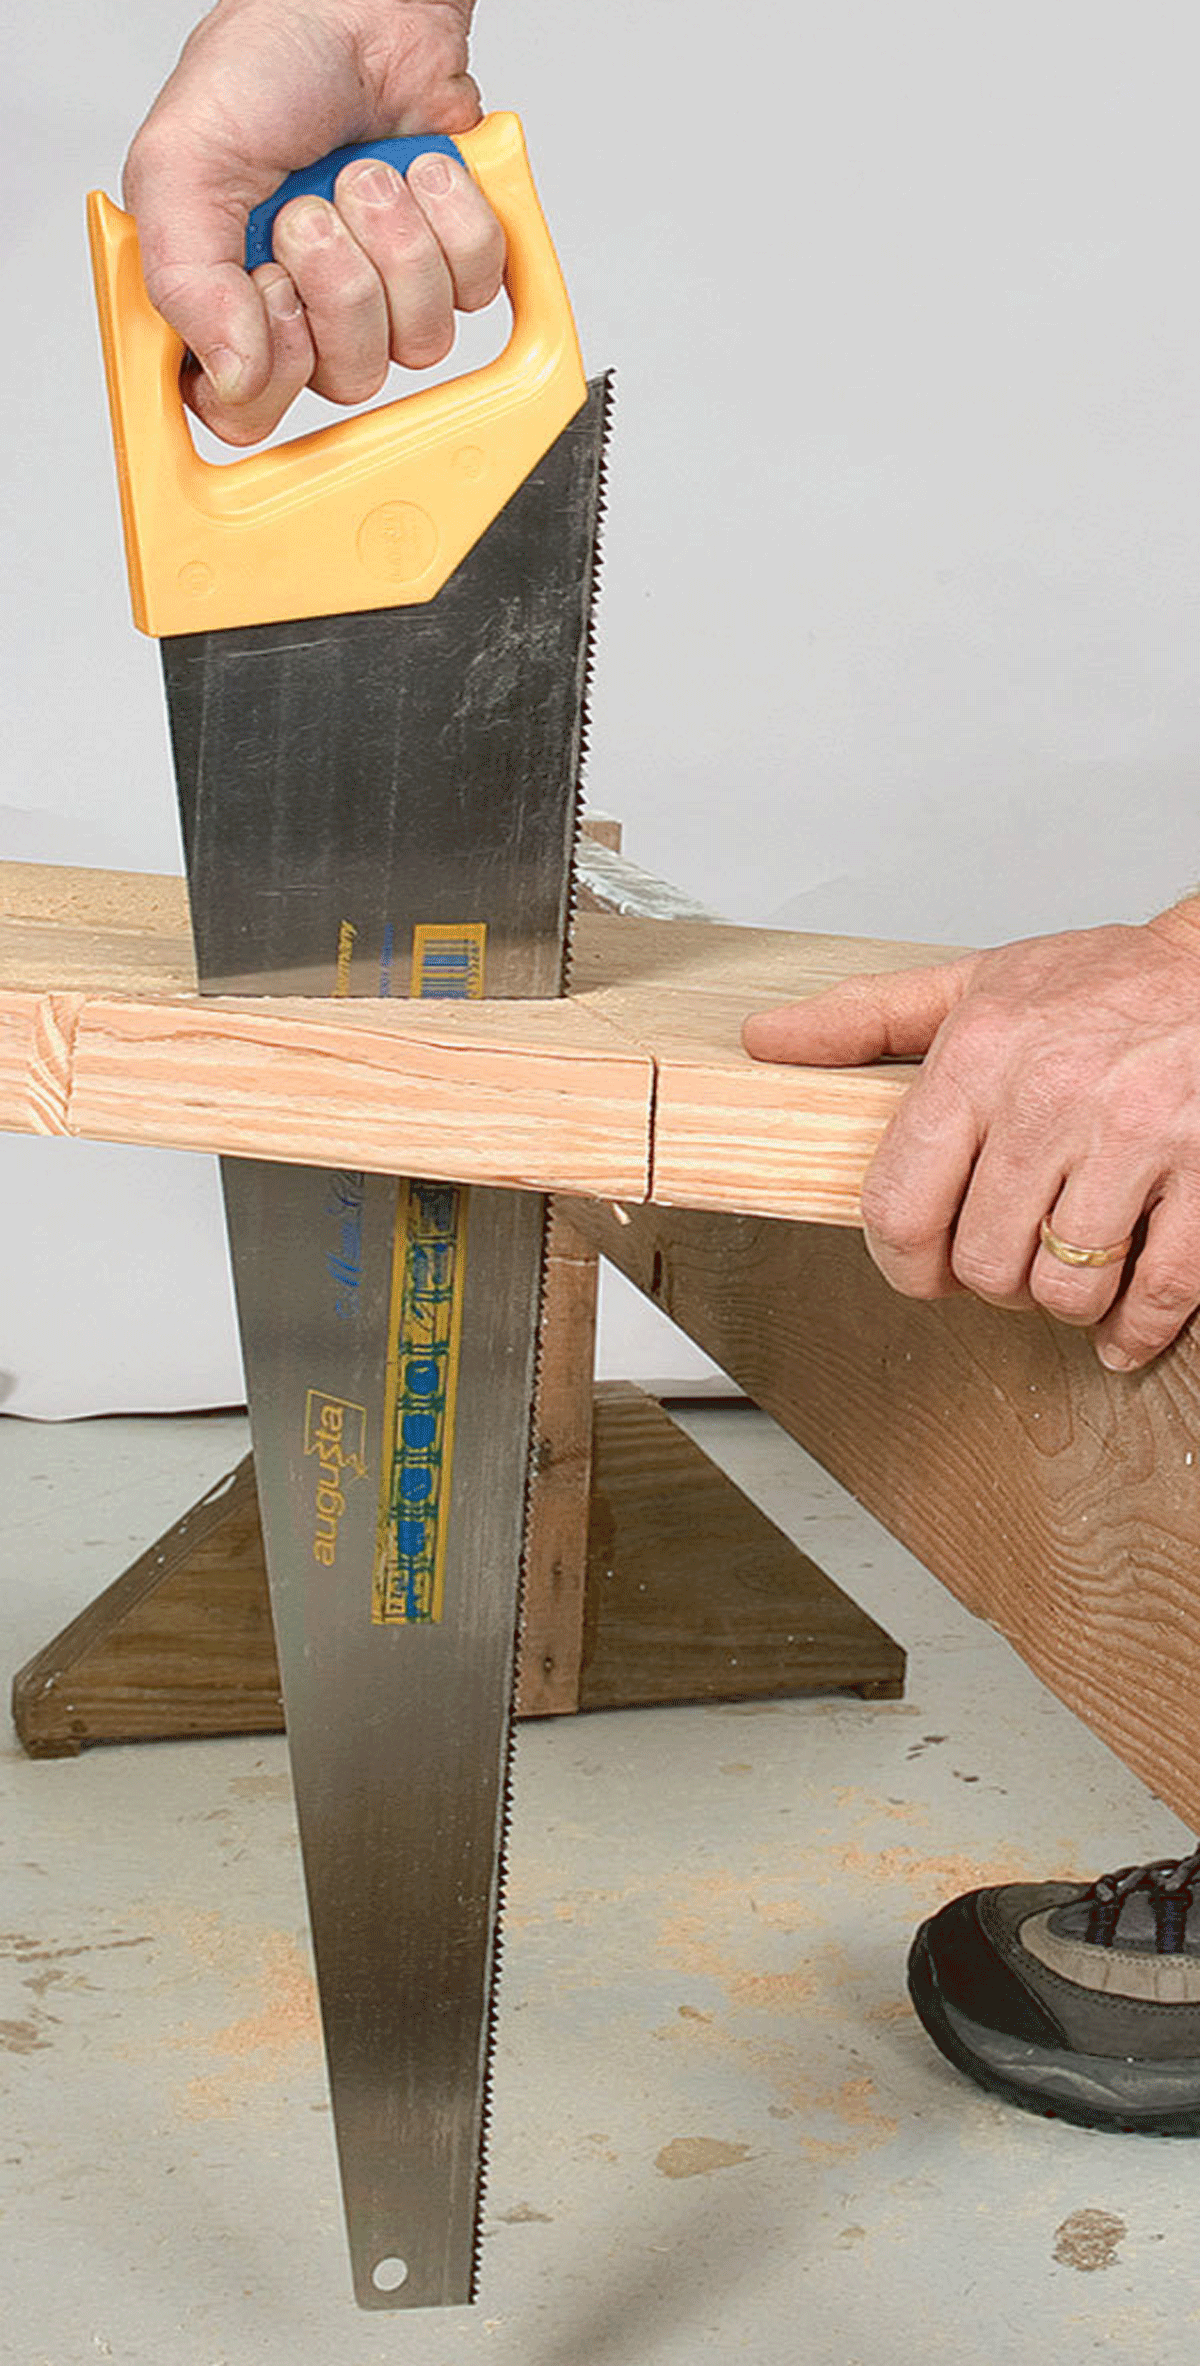 Go vertical for notches. When notching the end of a board or finishing the cuts for a stair stringer, cut with the saw perpendicular to the stock. This way you won’t cut any deeper on one side of the board than on the other.